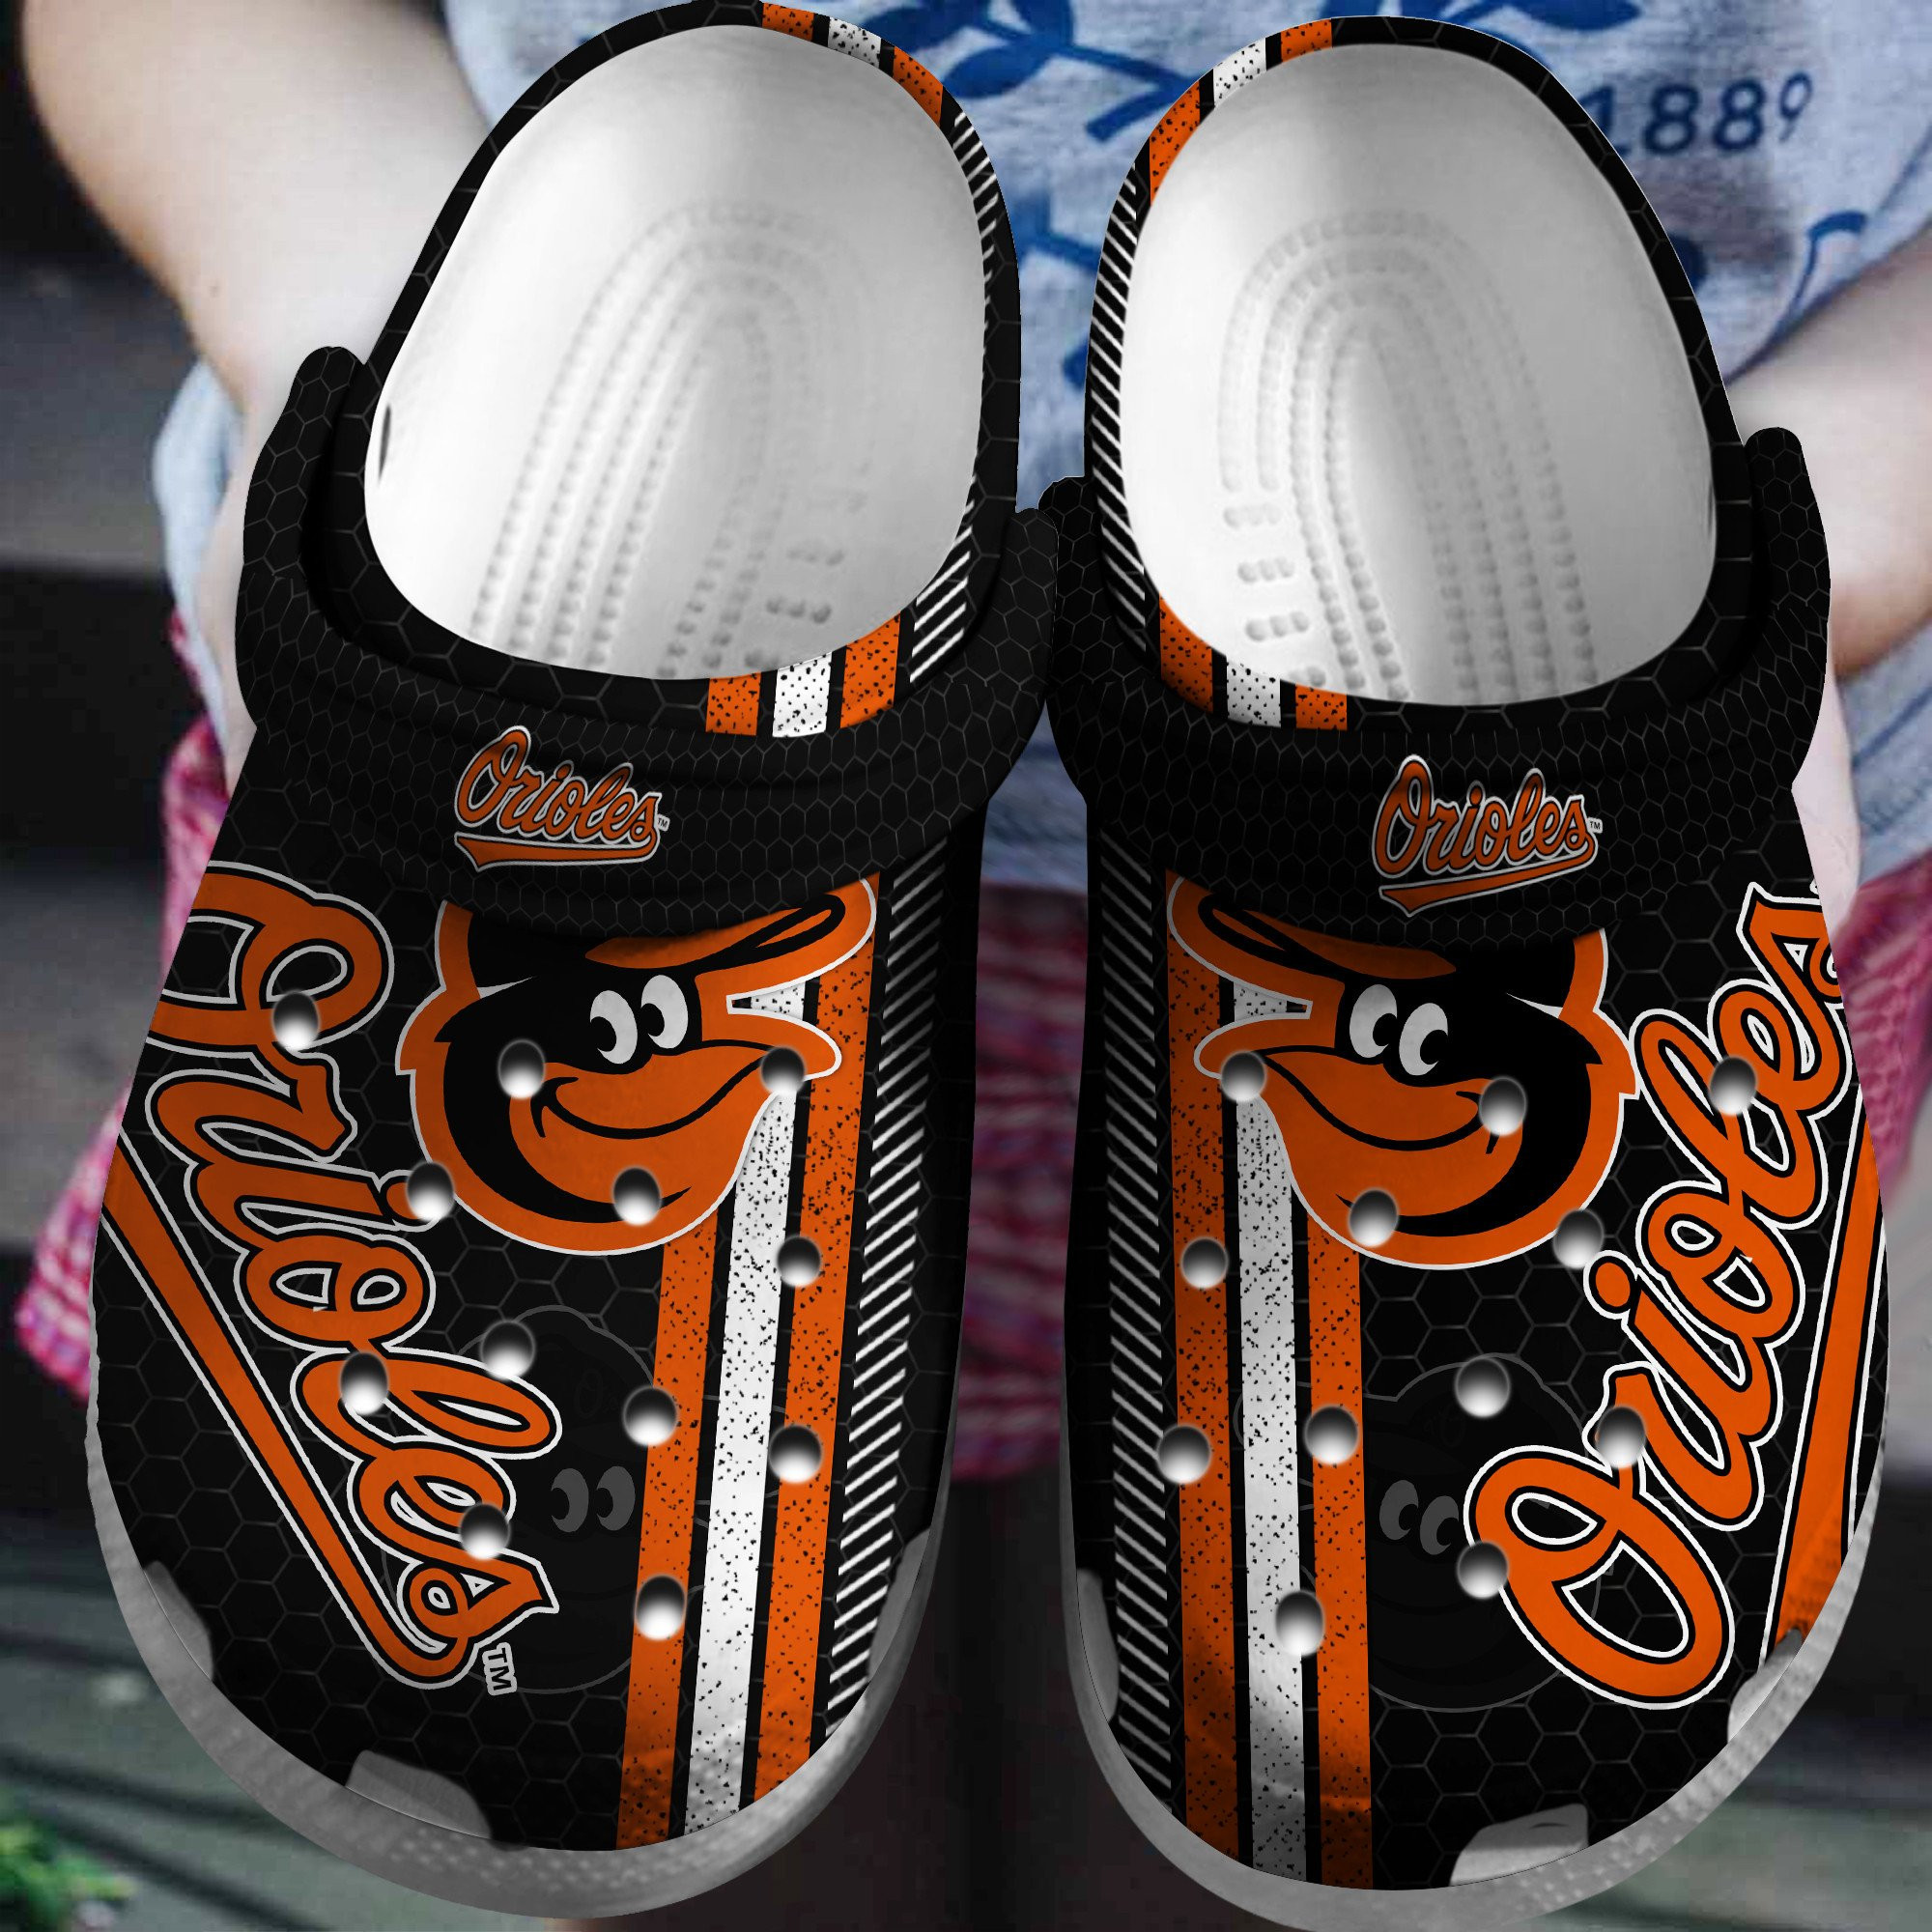 Hot Mlb Team Baltimore Orioles Orange-Black Crocs Clog Shoesshoes Trusted Shopping Online In The World